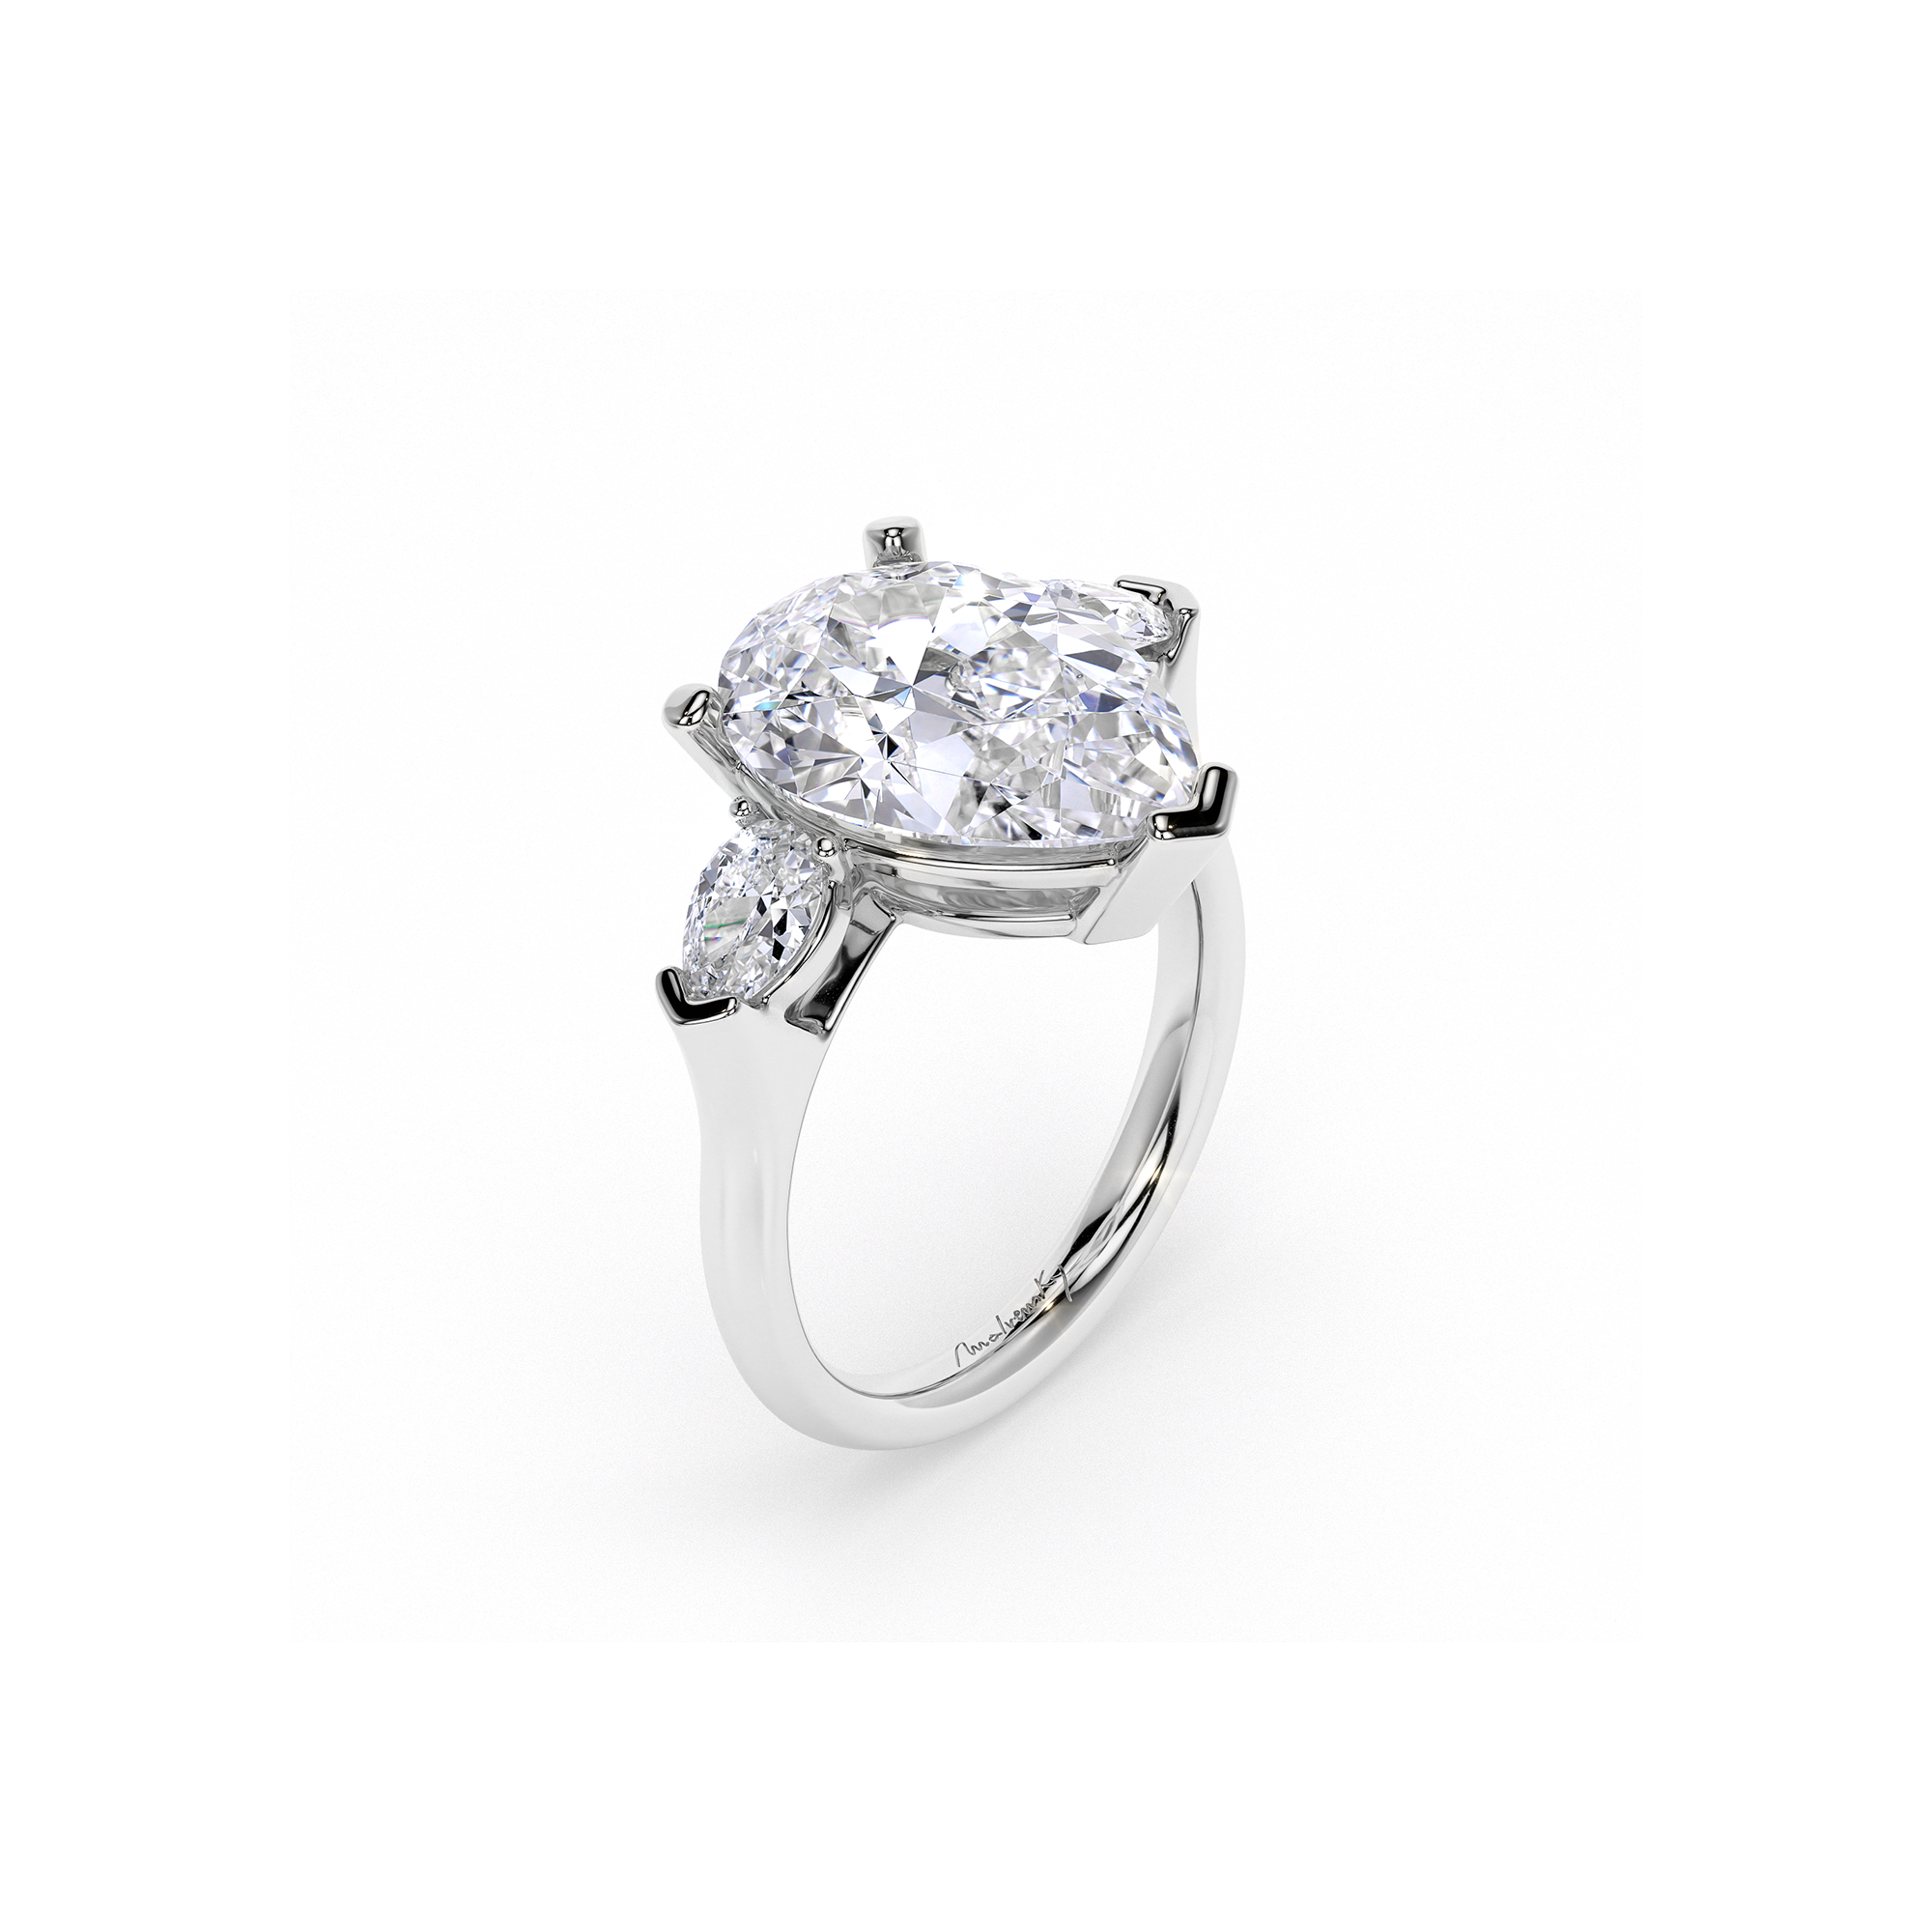 18 KT White Gold Trilogy Engagement Ring Pear Cut 5.75 CT